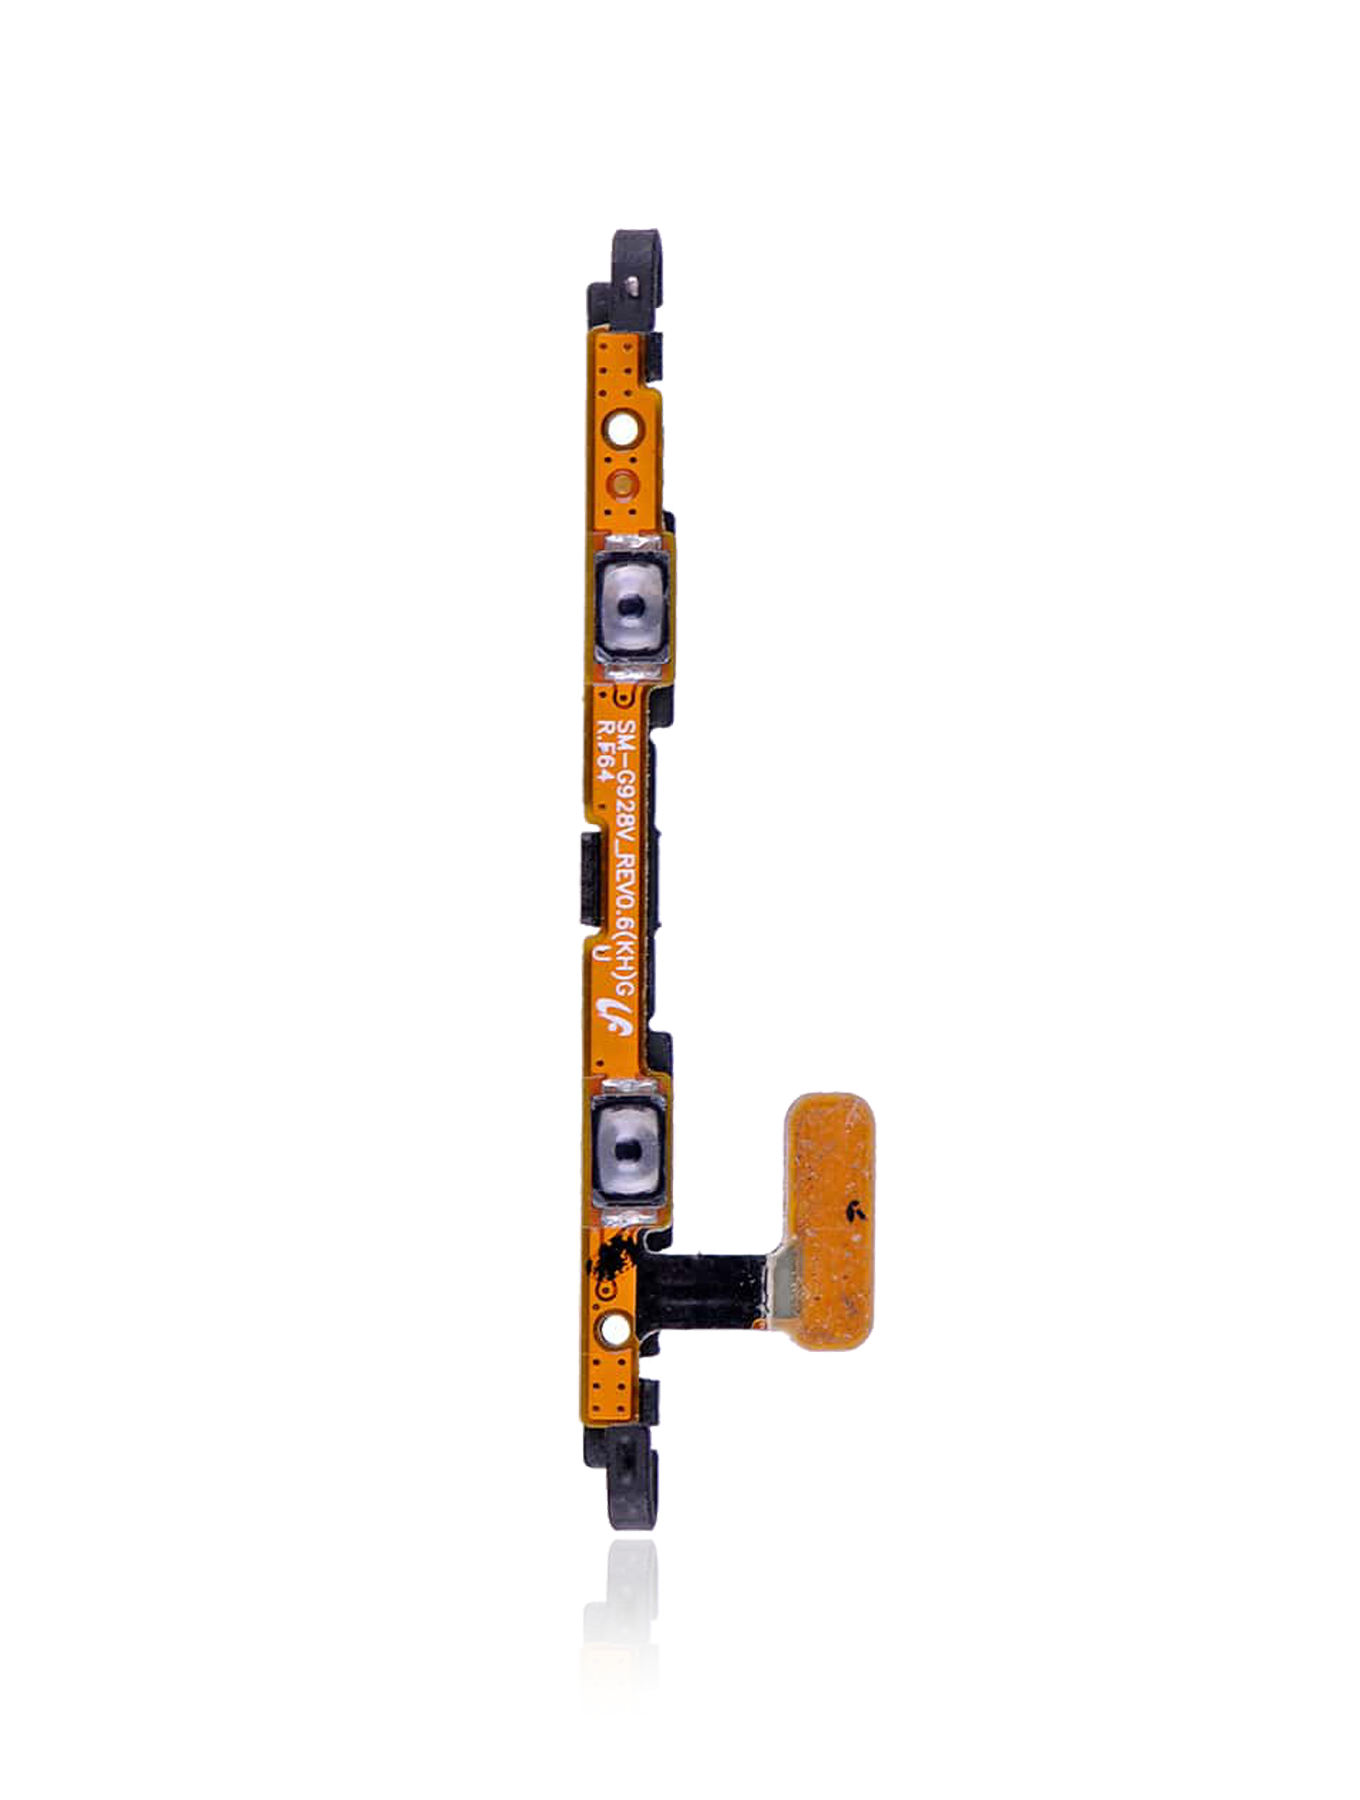 For Samsung Galaxy S6 Edge Plus Volume Button Flex Cable Replacement